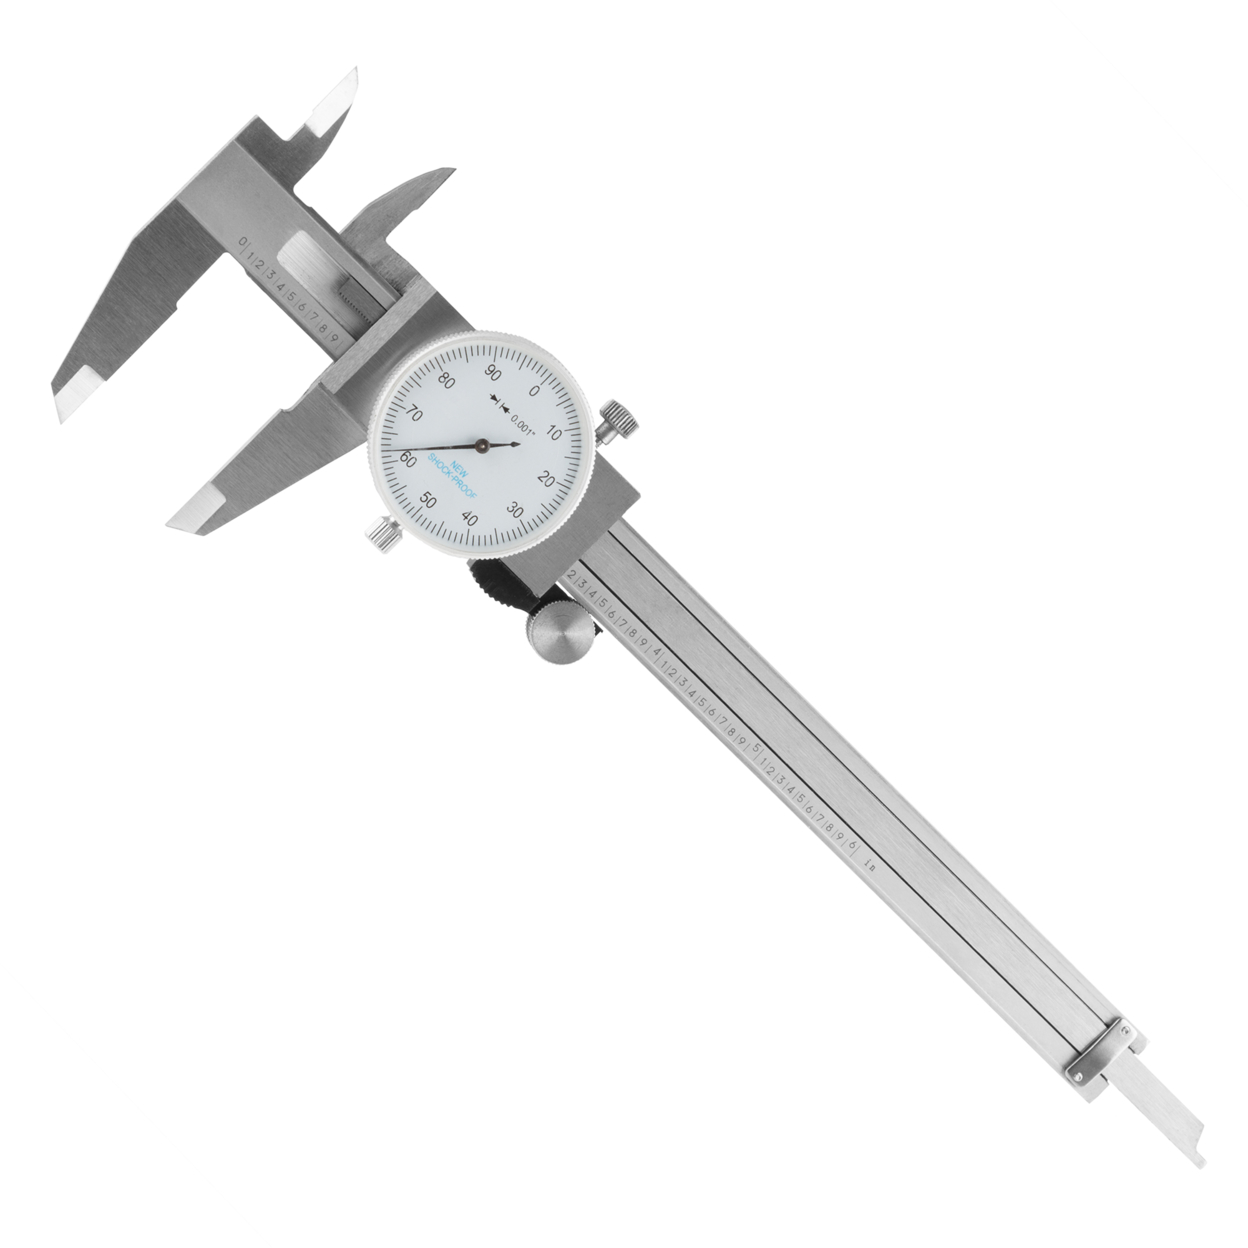 Dial Caliper Stainless Steel Up To 6 Inches Measure Inside And Outside SAE Only